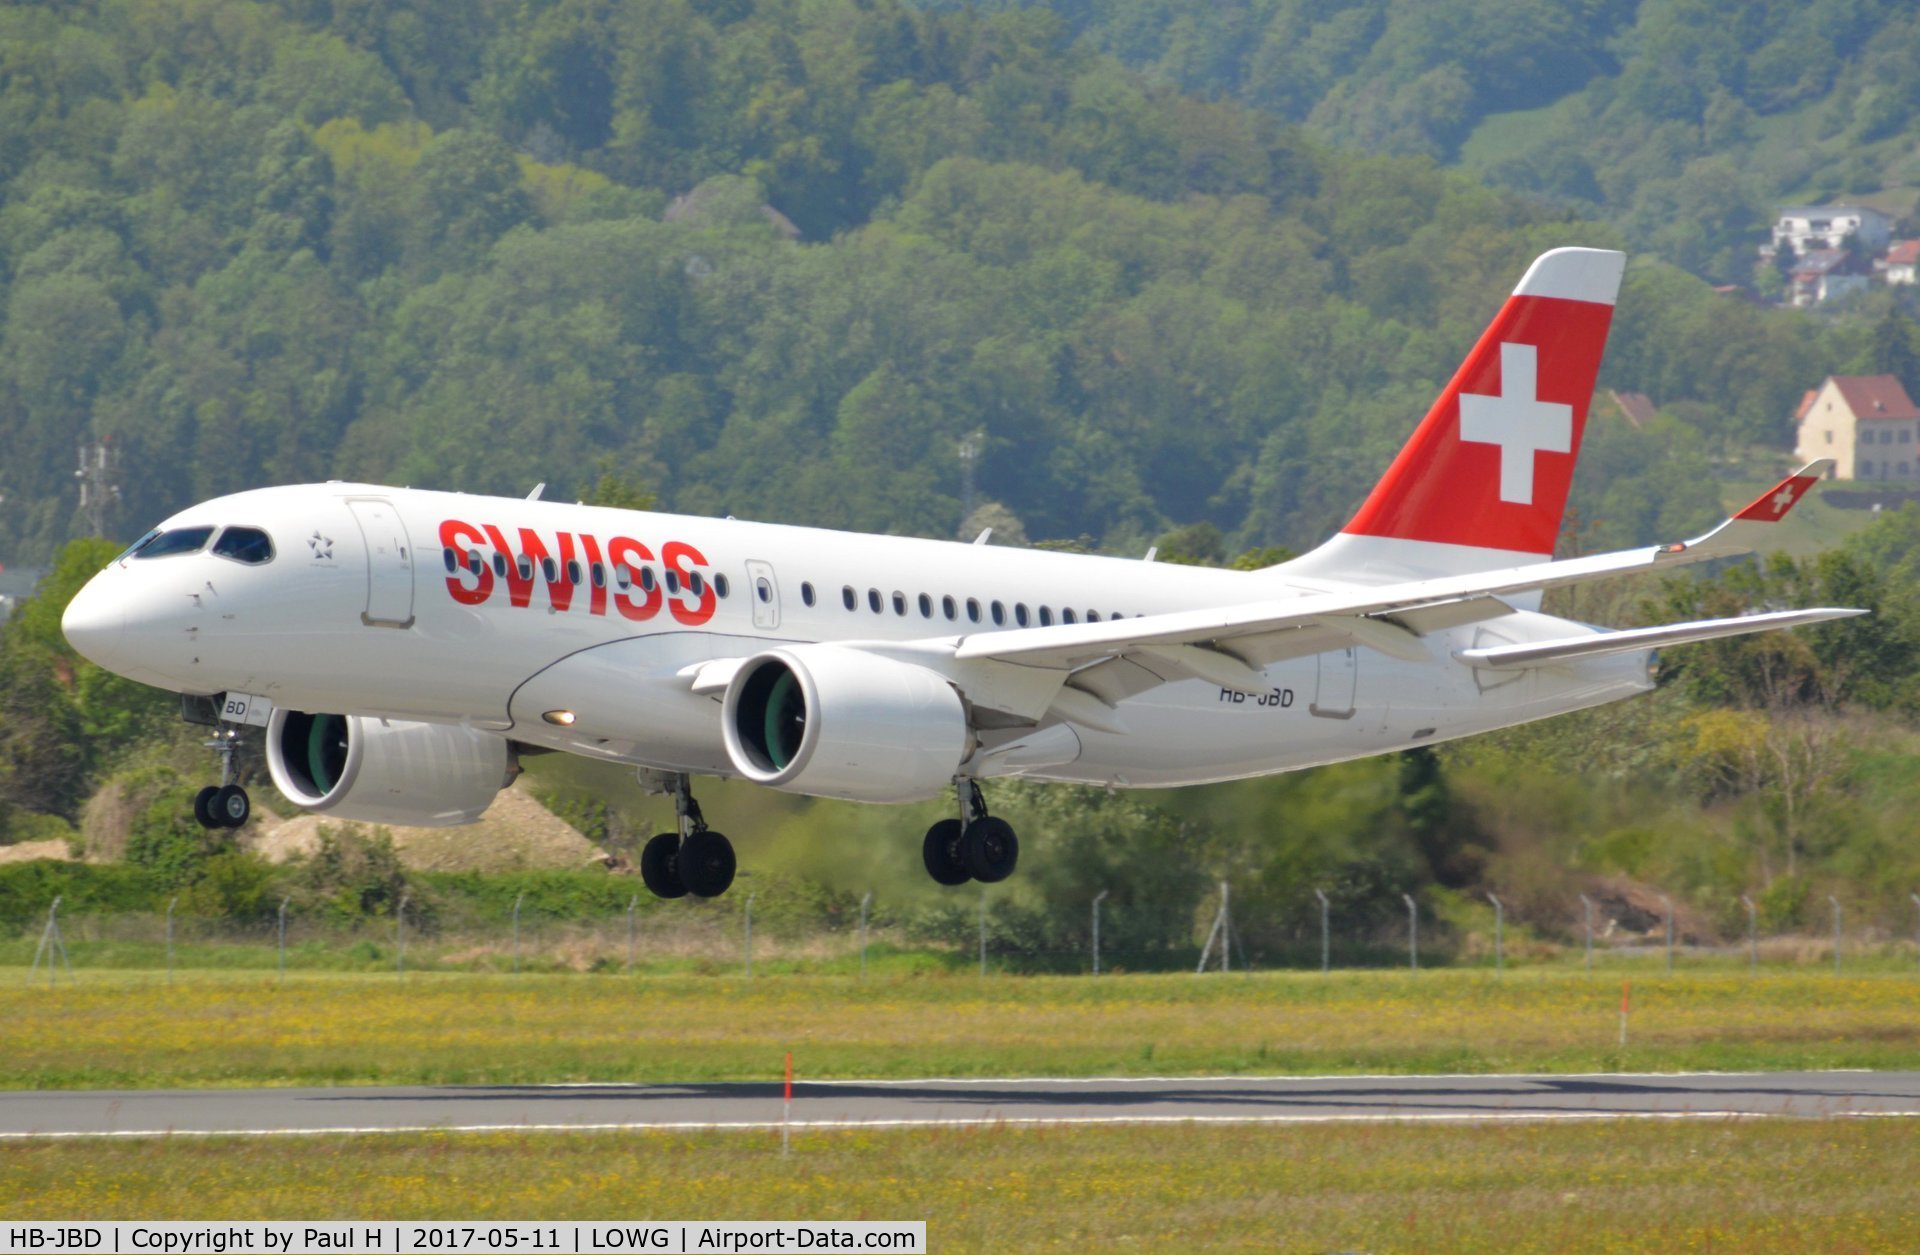 HB-JBD, 2016 Bombardier CSeries CS100 (BD-500-1A10) C/N 50013, CS100 from SWISS, performing a touch-and-go at LOWG, pilot flight training